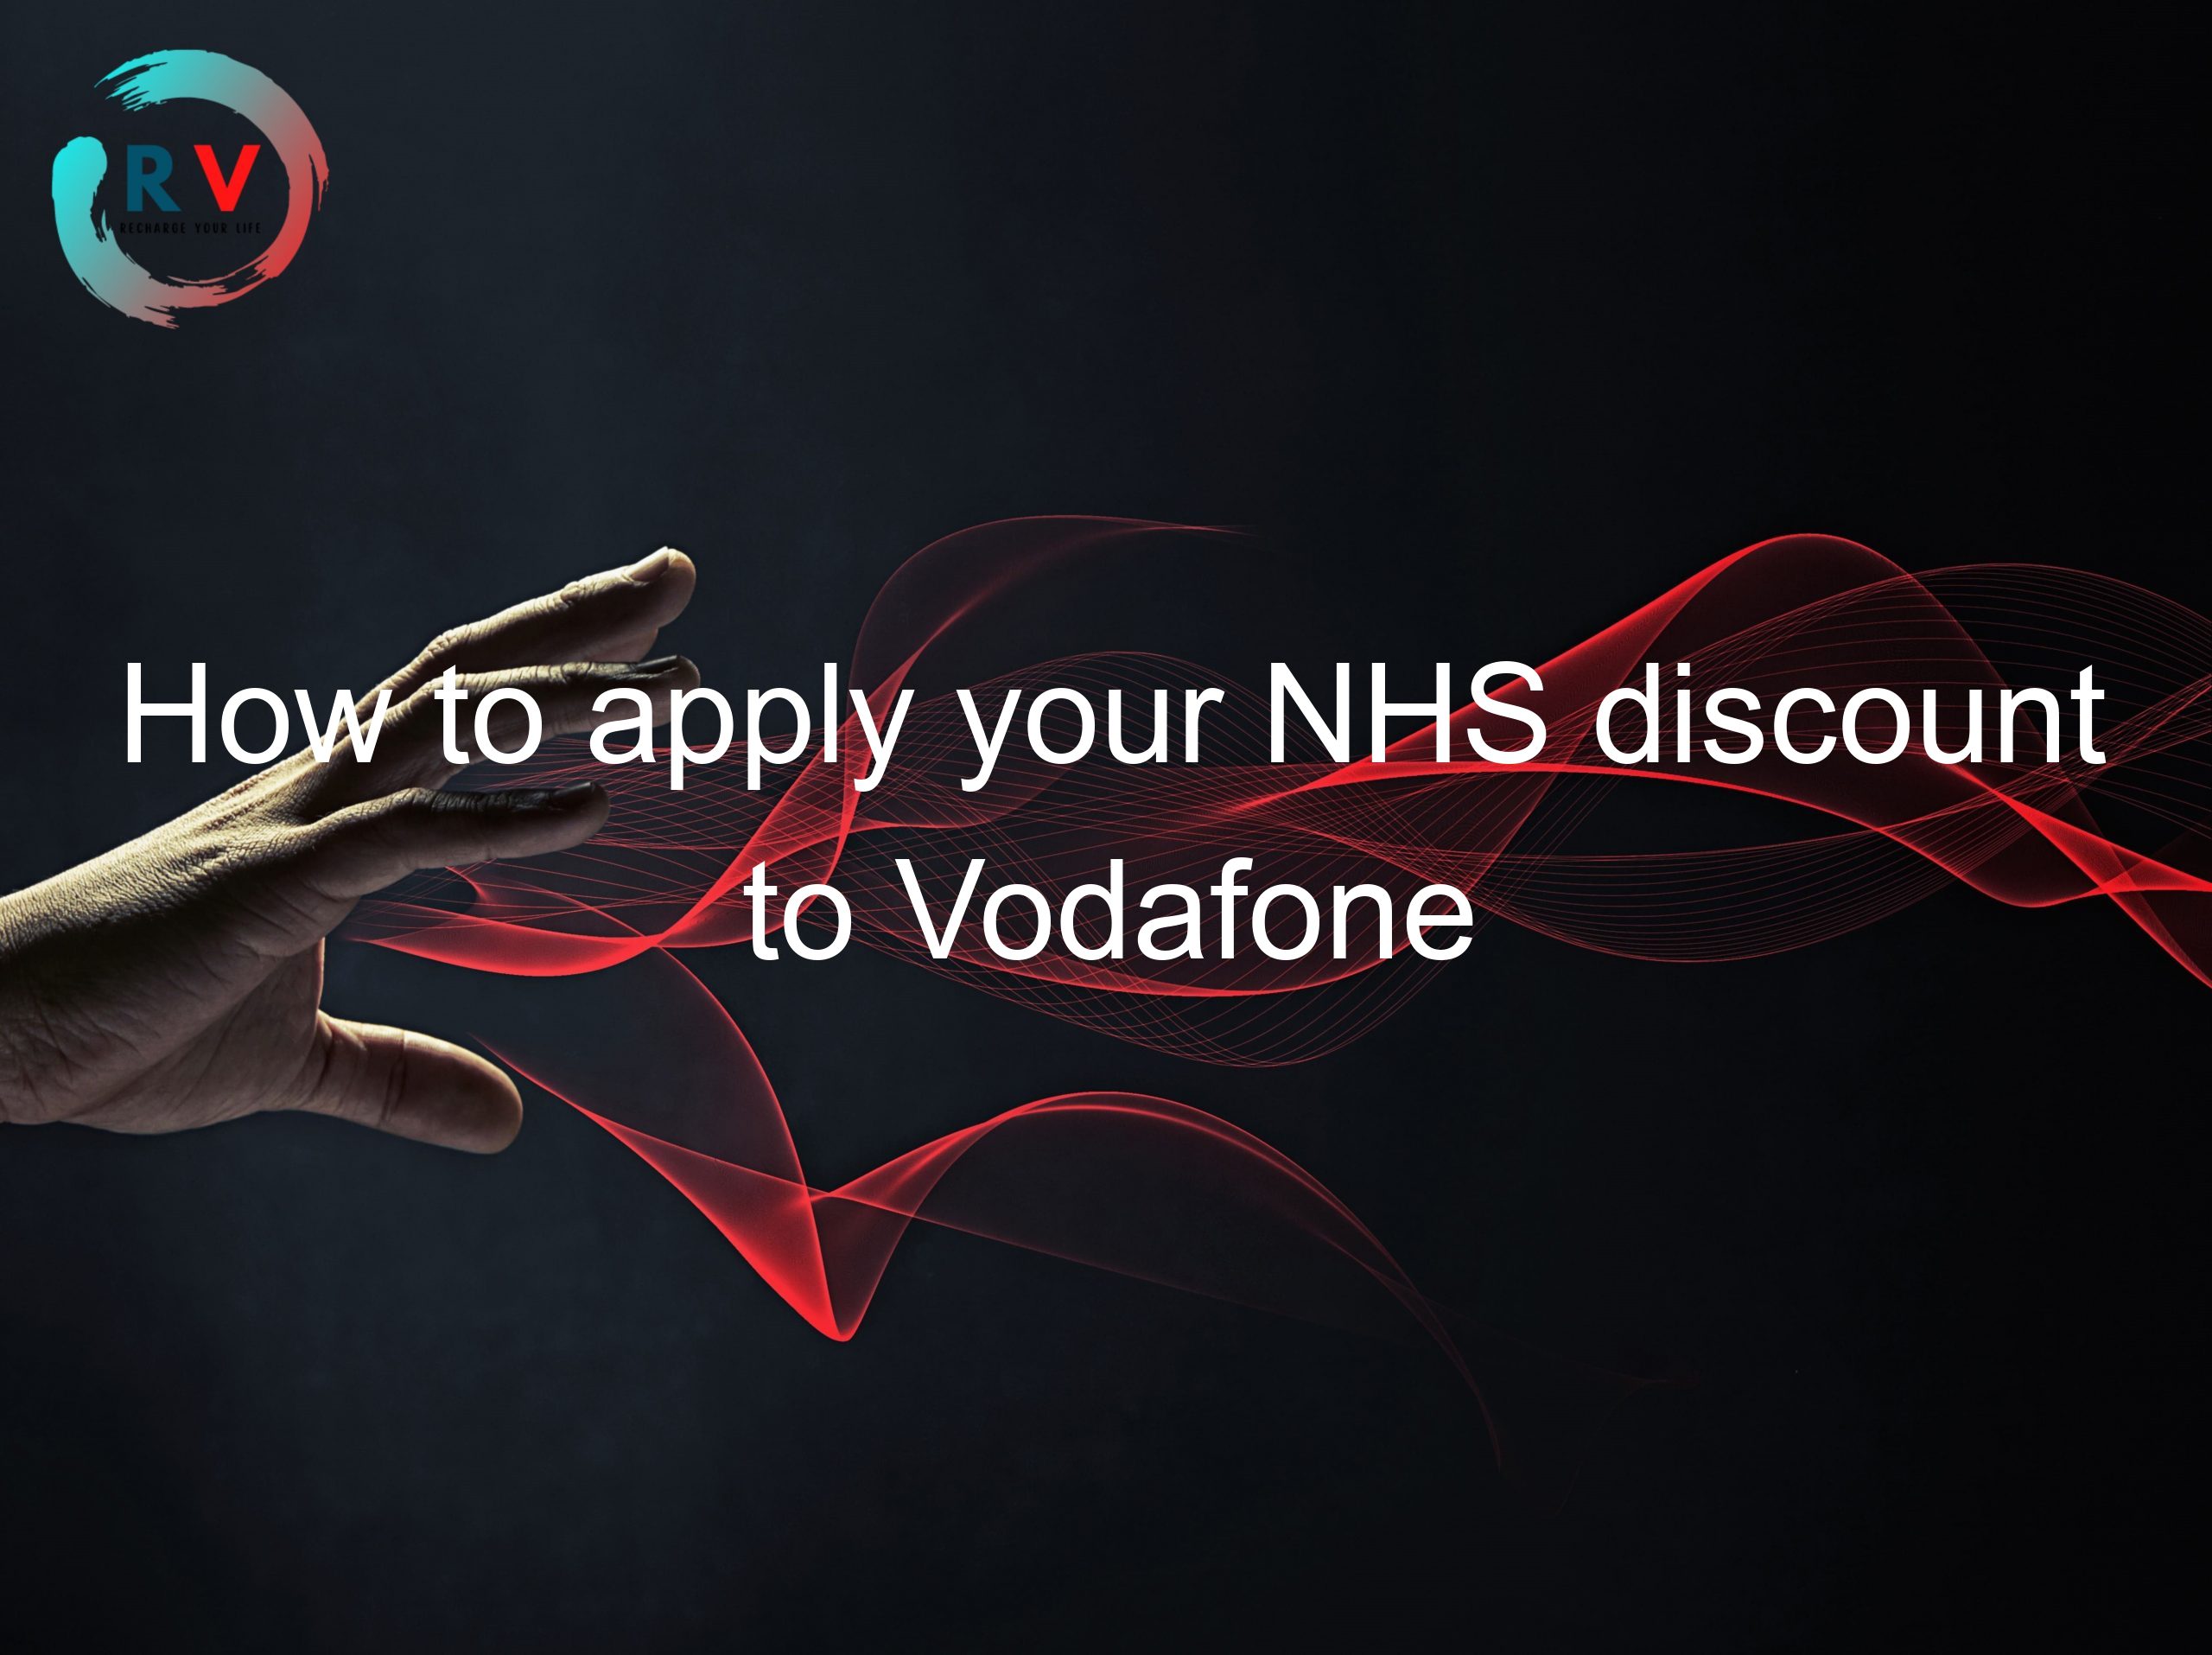 How to apply your NHS discount to Vodafone